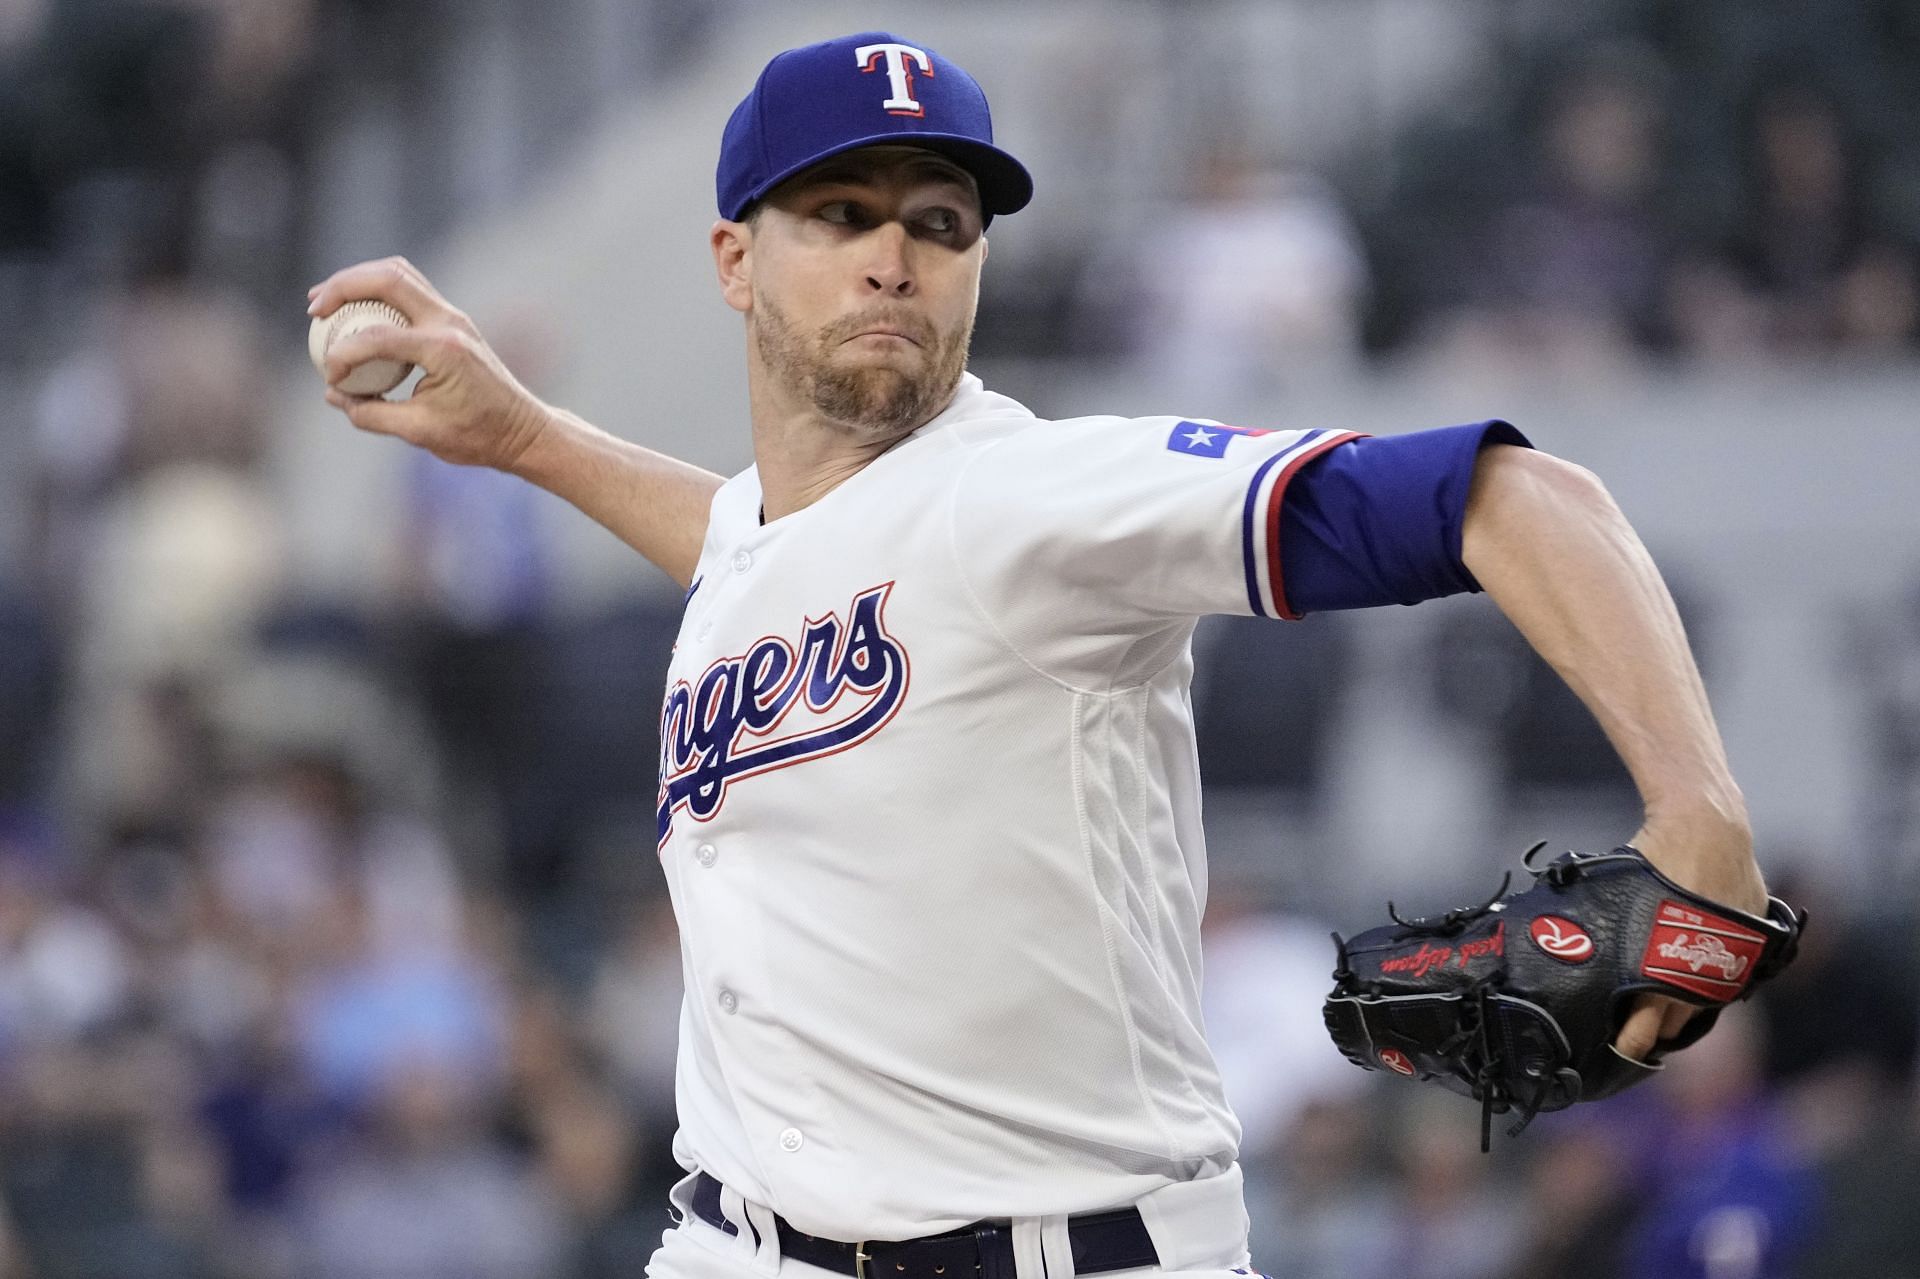 Rangers ace Jacob deGrom leaves start with sore right wrist